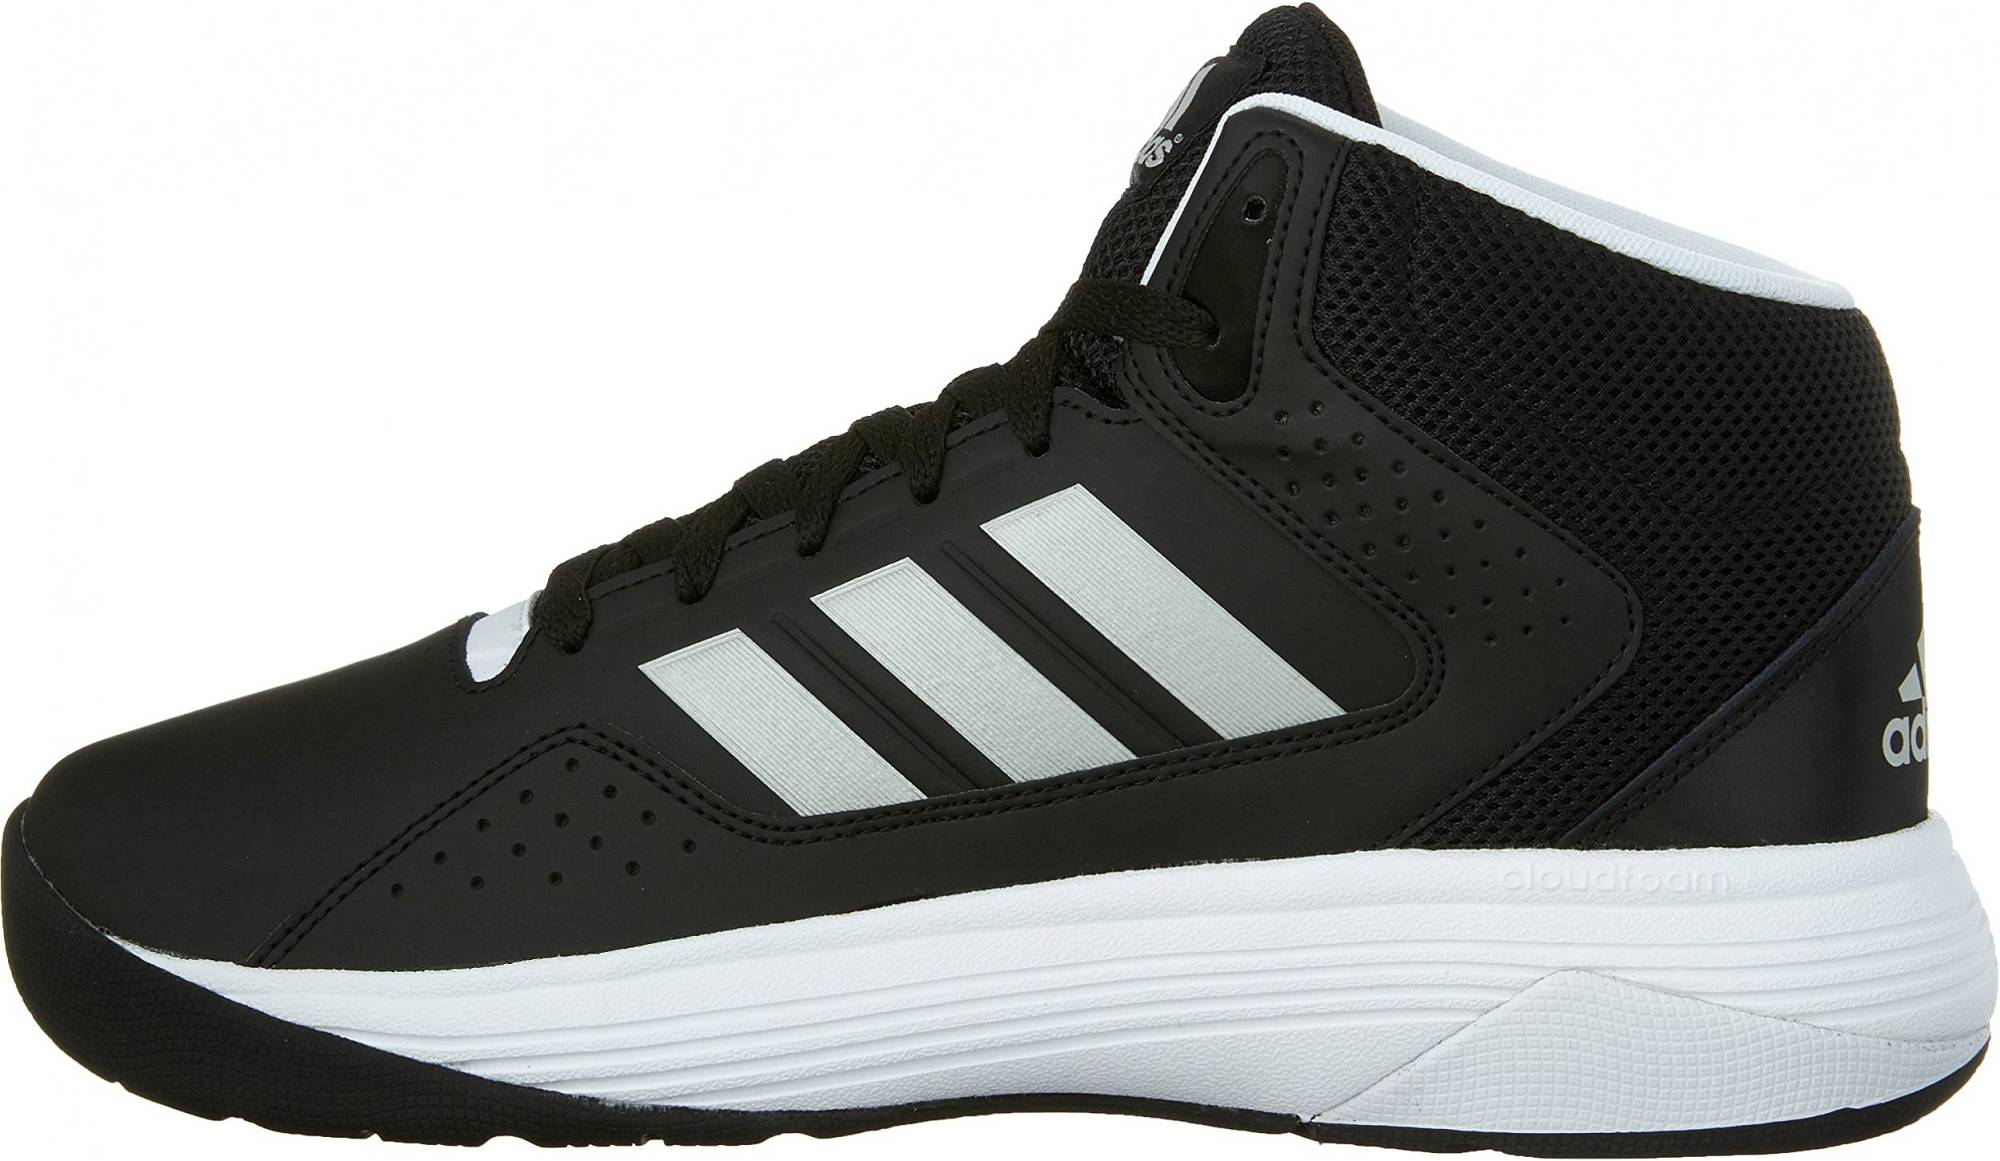 Adidas Cloudfoam Ilation Mid – Shoes Reviews & Reasons To Buy